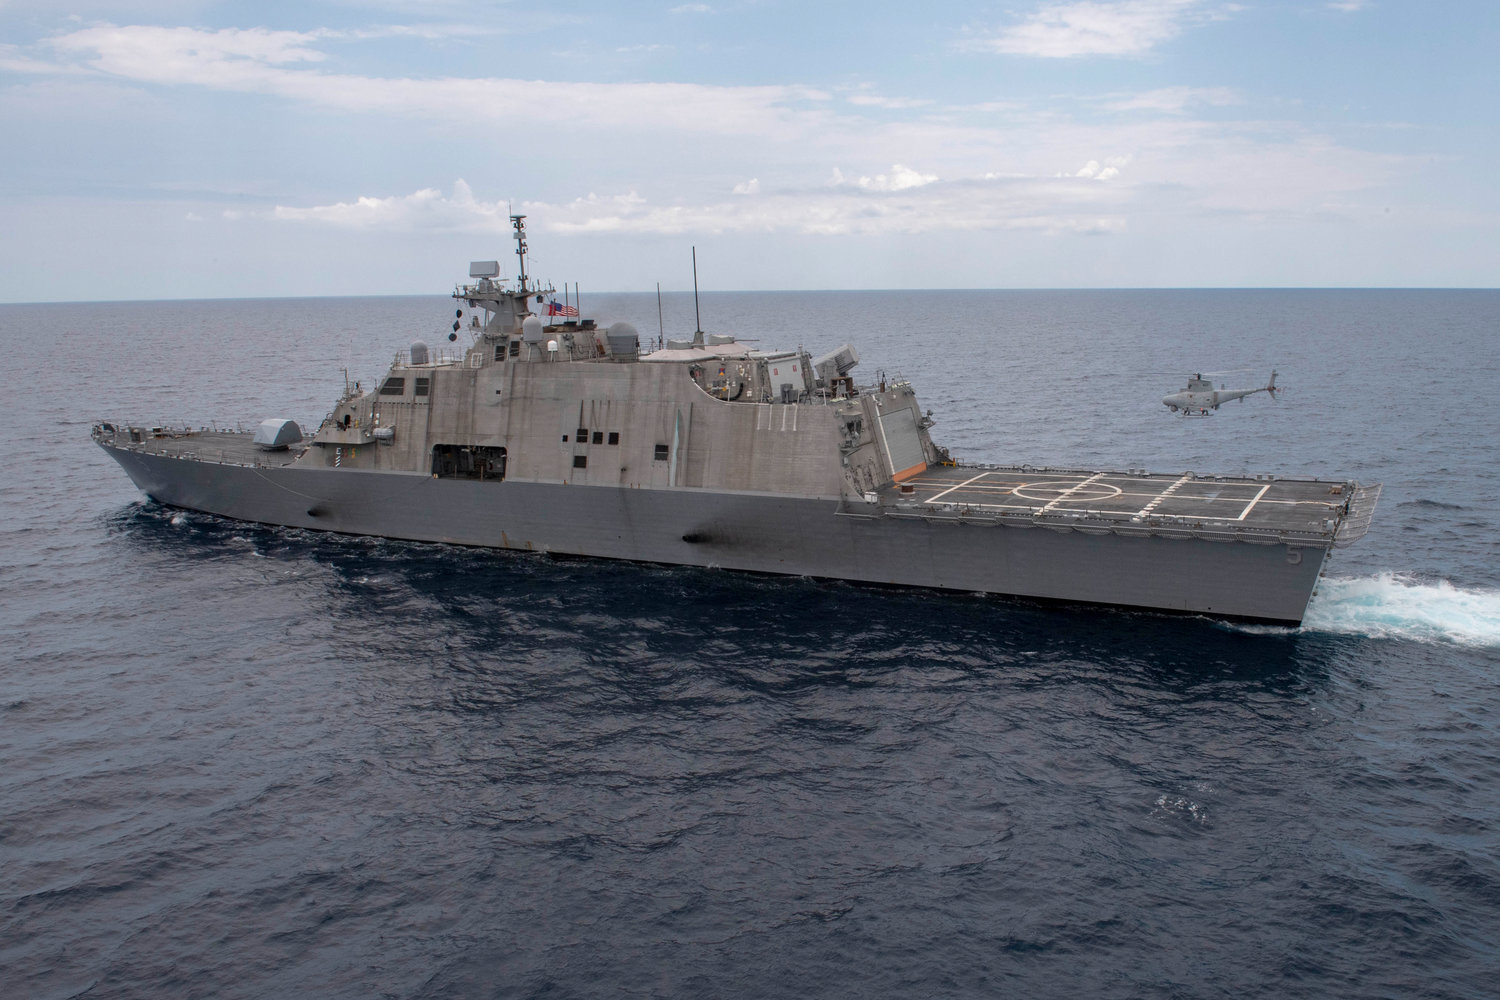 190627-N-KK394-183..ATLANTIC OCEAN (June 27, 2019) An MQ-8B Fire Scout unmanned aerial vehicle assigned to the Black Knights of Helicopter Sea Combat Squadron (HSC) 22 conducts flight operations during an underway with the Freedom-class littoral combat ship USS Milwaukee (LCS 5). Milwaukee is underway conducting routine exercises in the Atlantic Ocean. (U.S. Navy photo by Mass Communication Specialist 2nd Class Anderson W. Branch/Released)